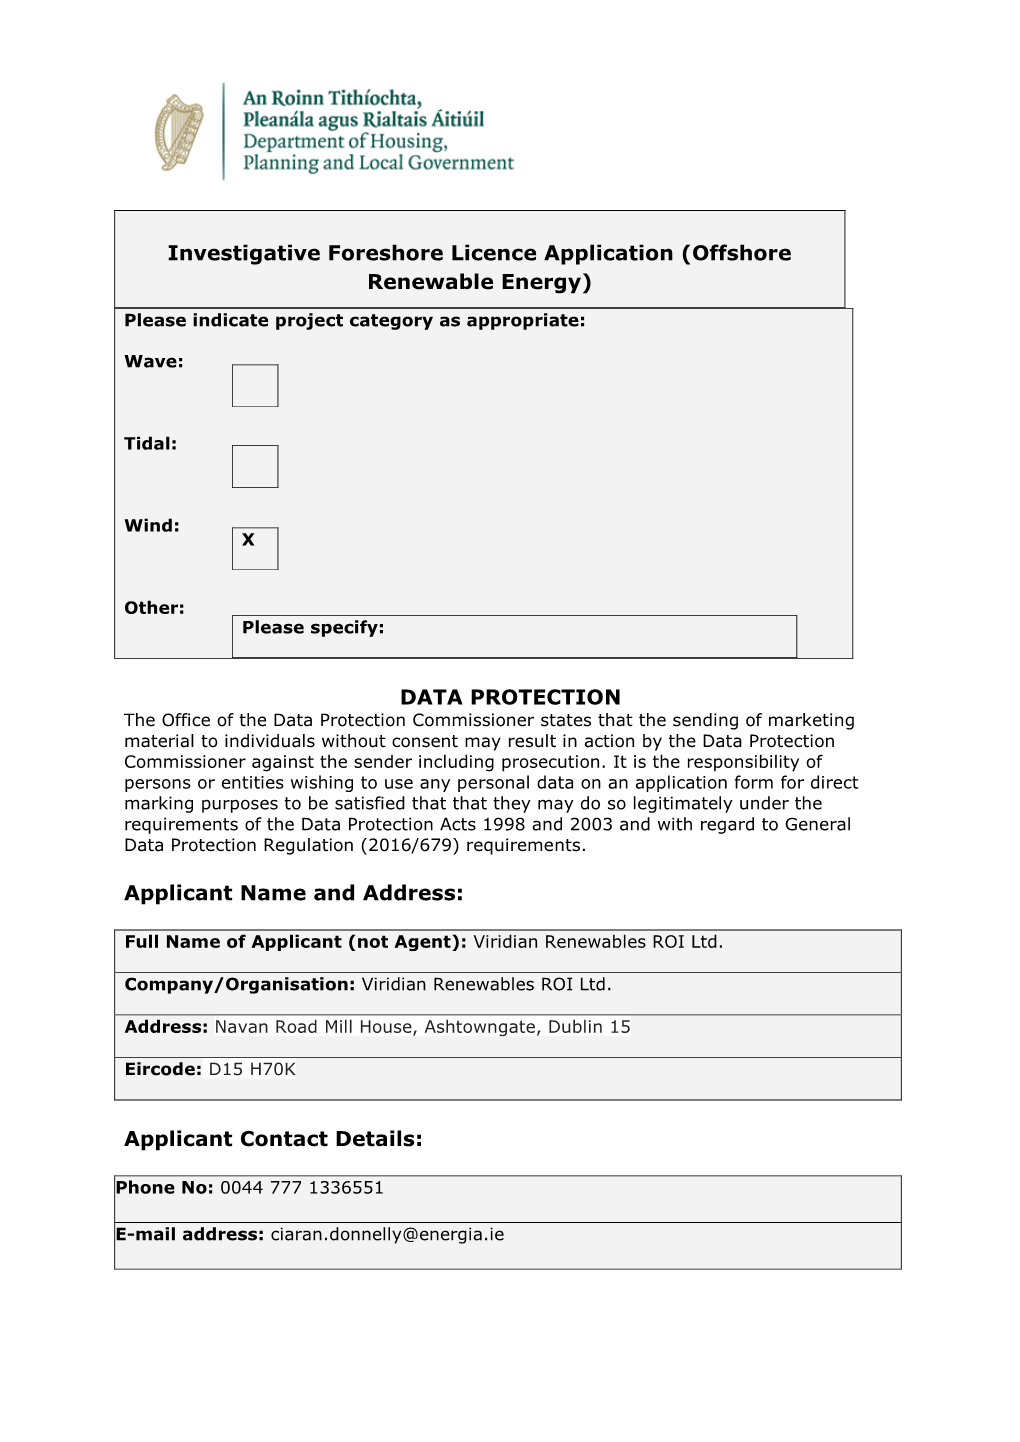 Investigative Foreshore Licence Application (Offshore